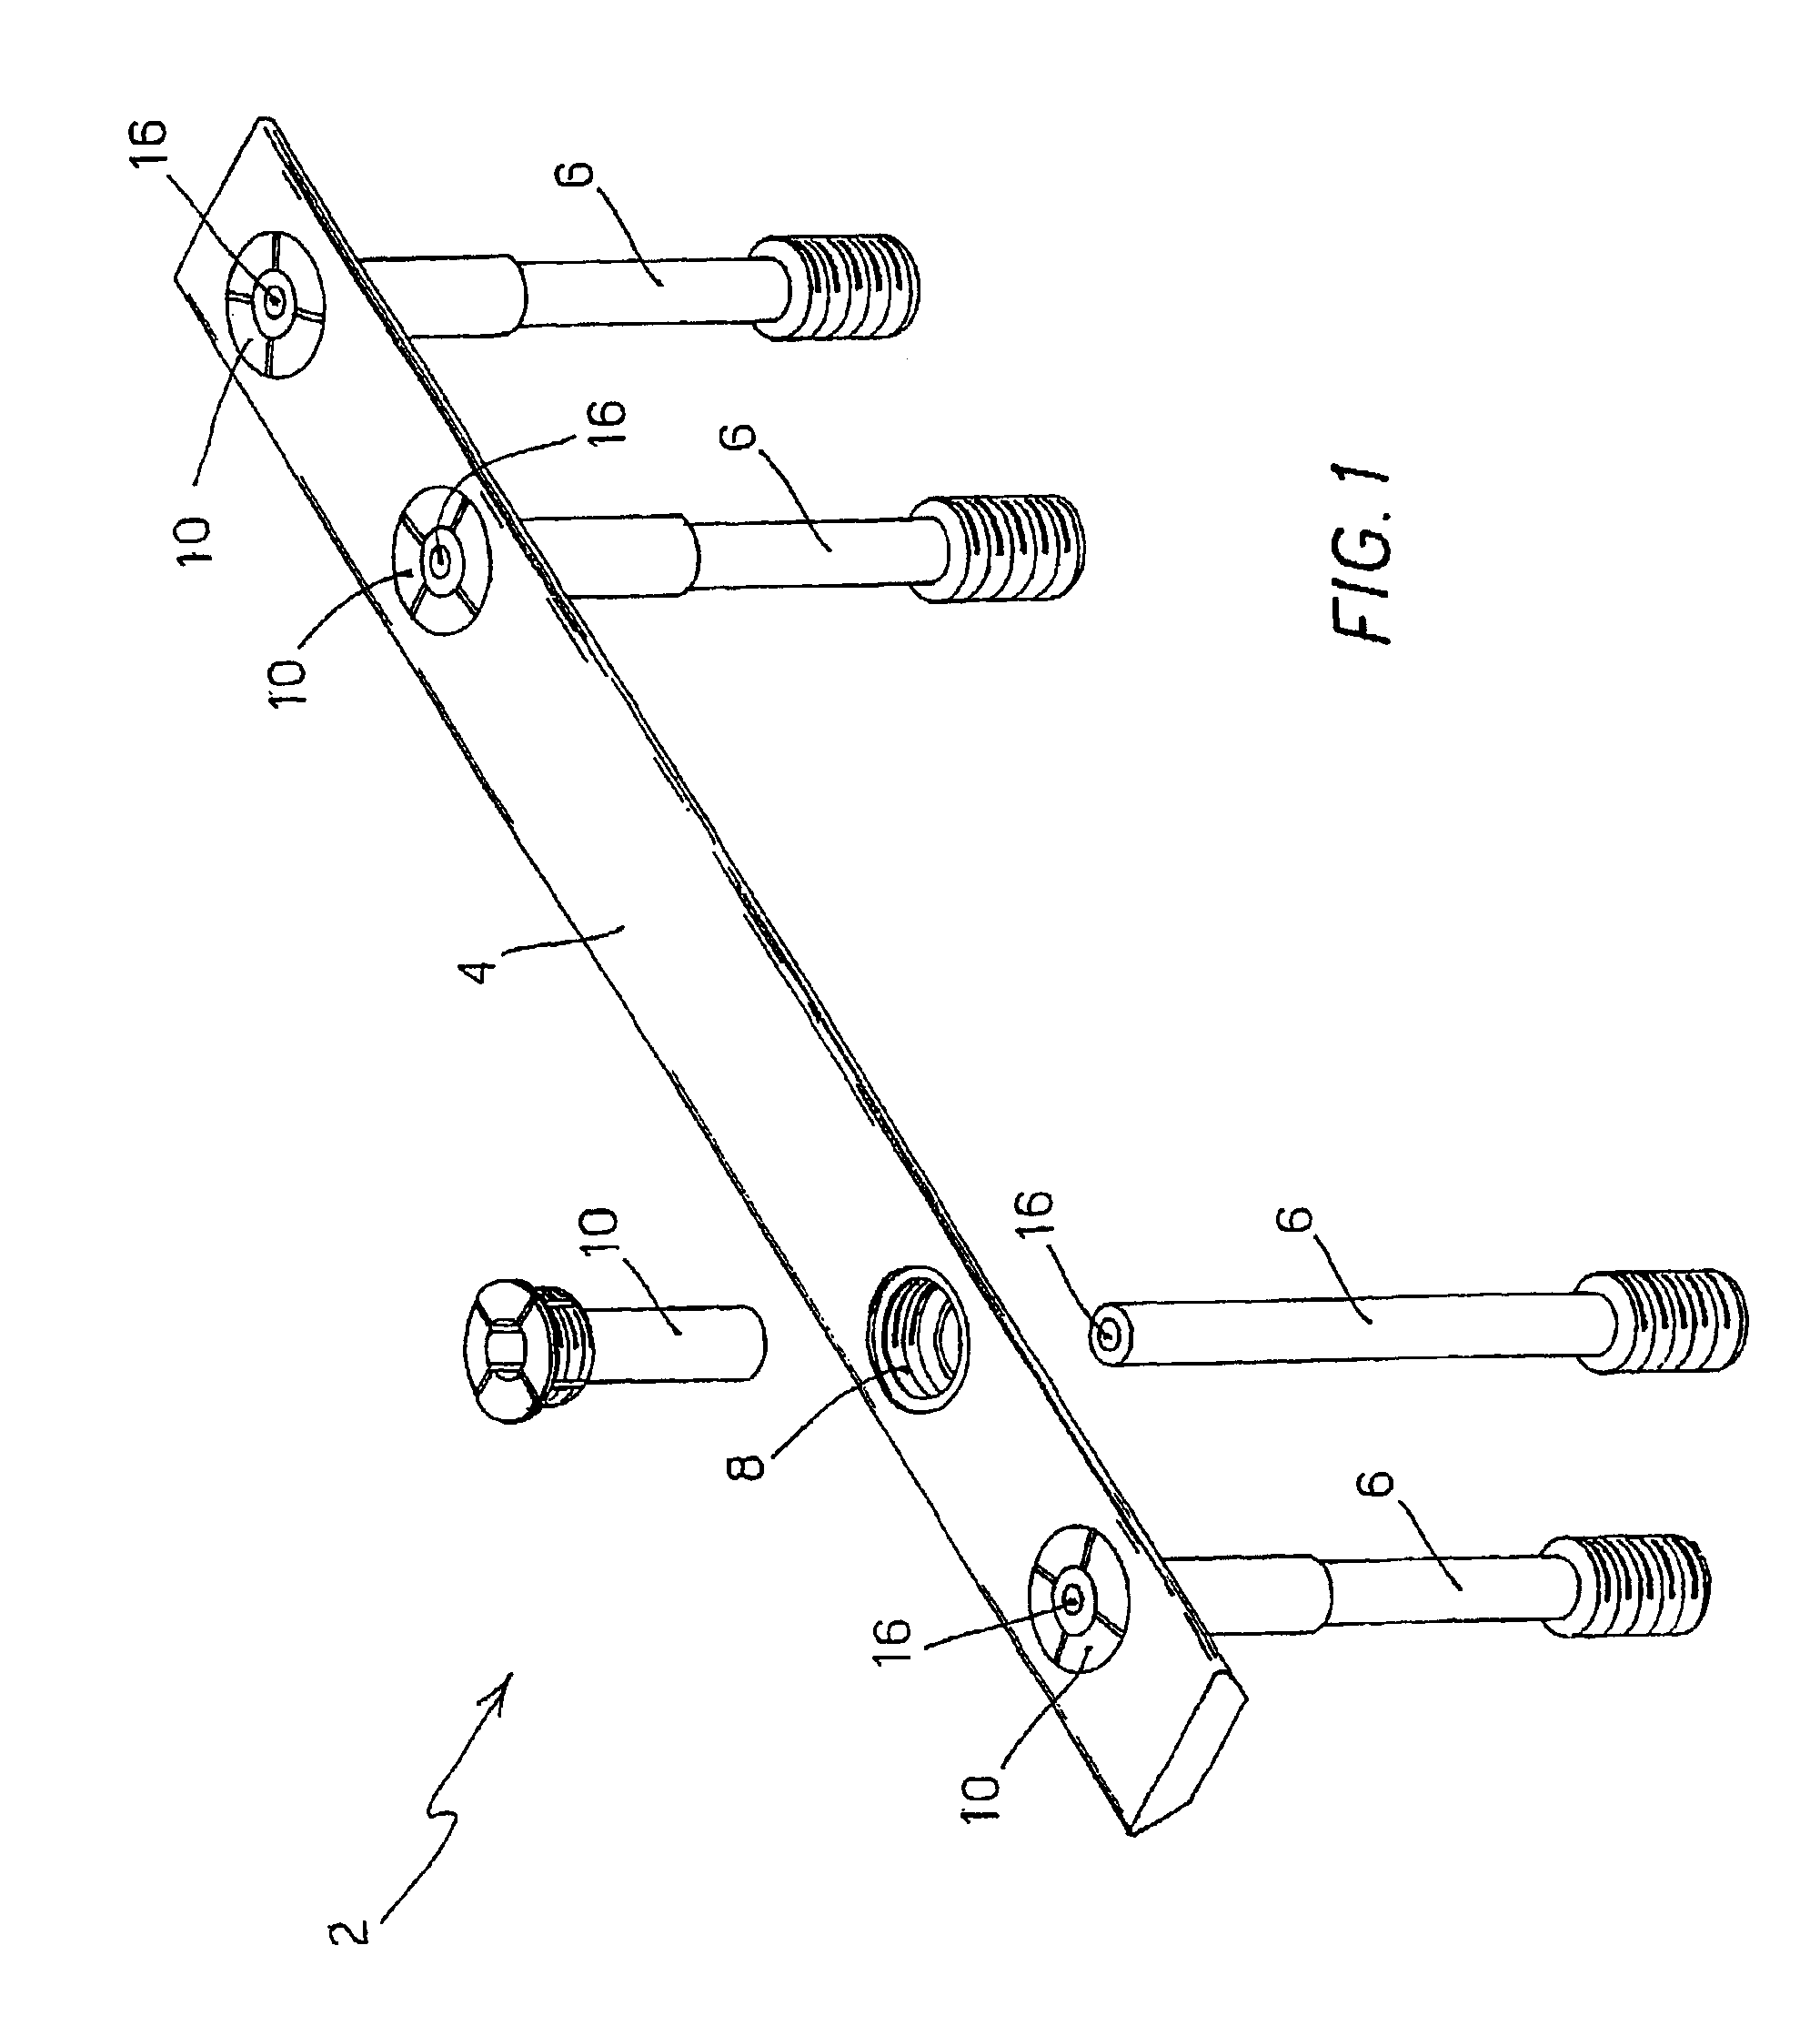 Device for fixing bone sections separated because of a fracture